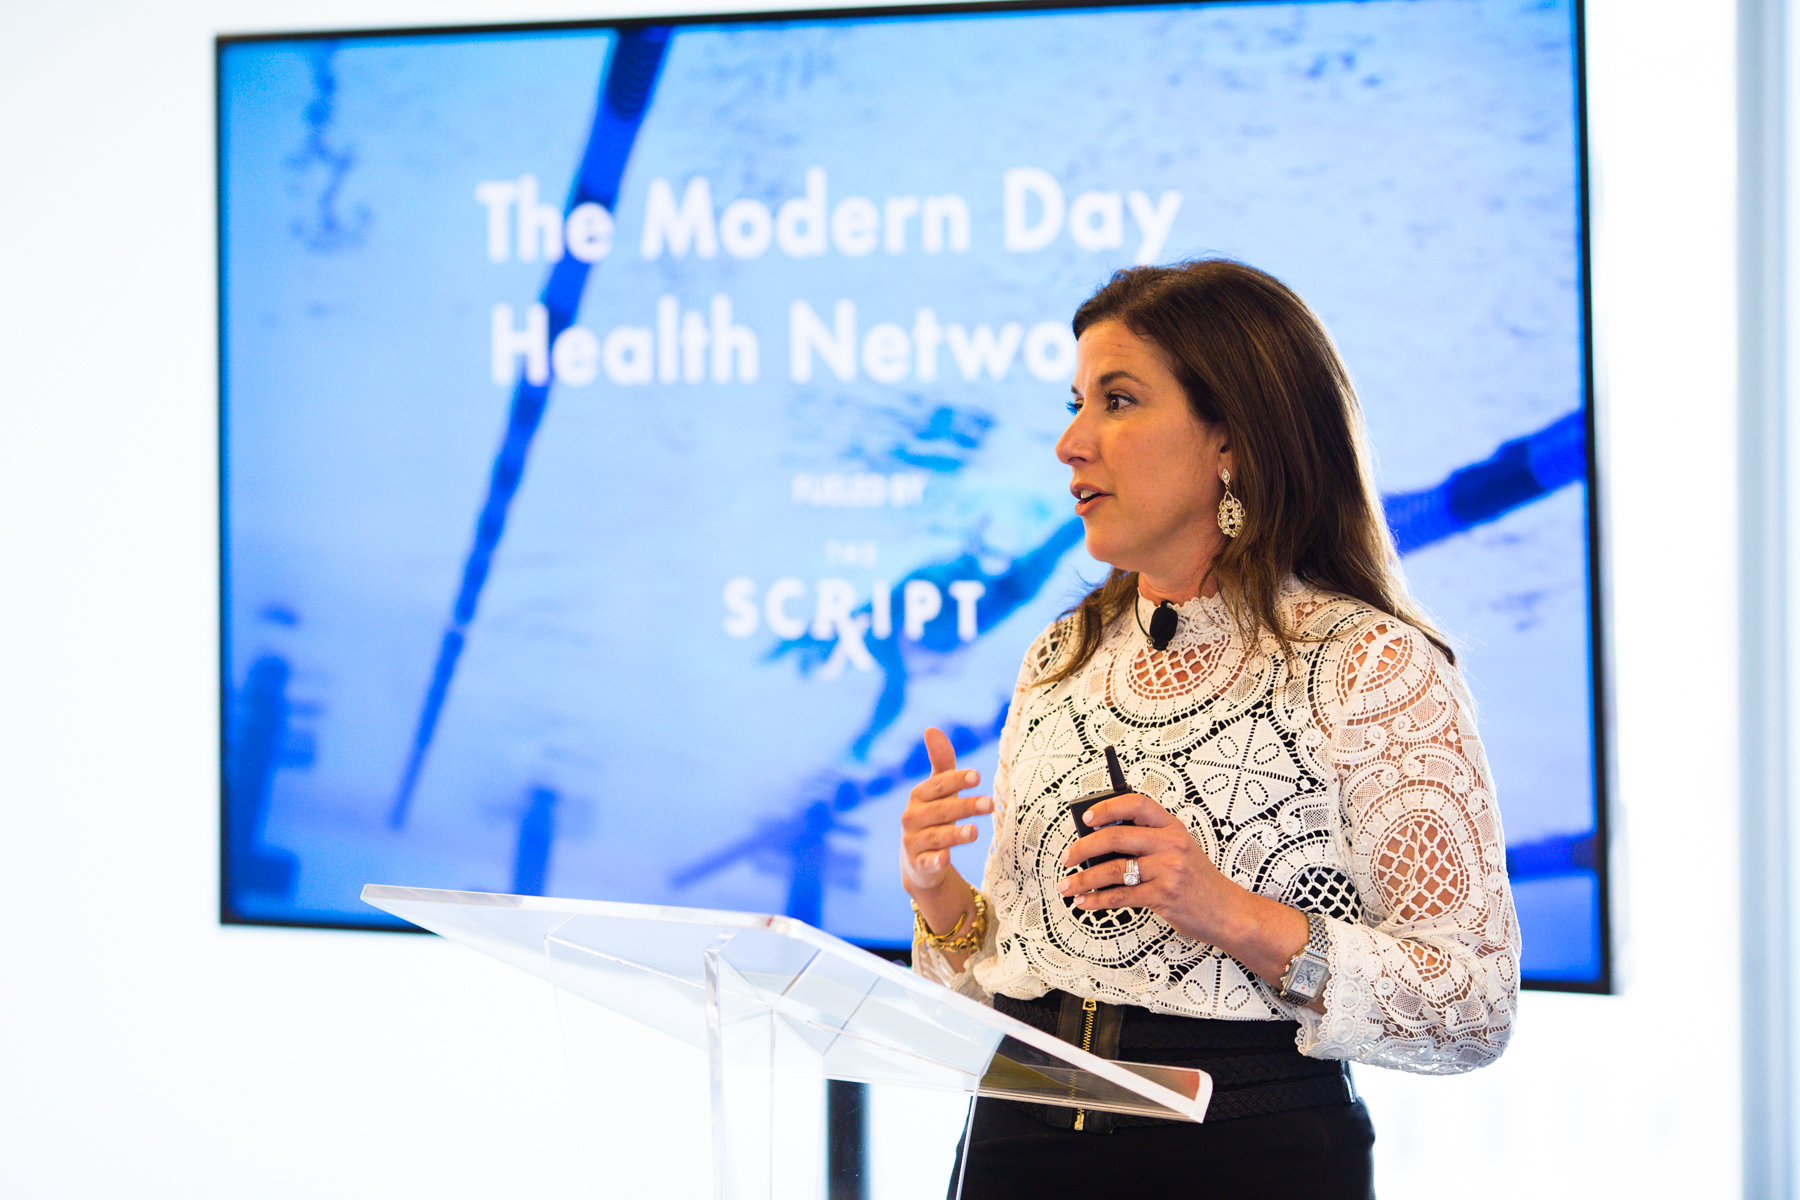 Carrie Moore head of health at Conde Nast